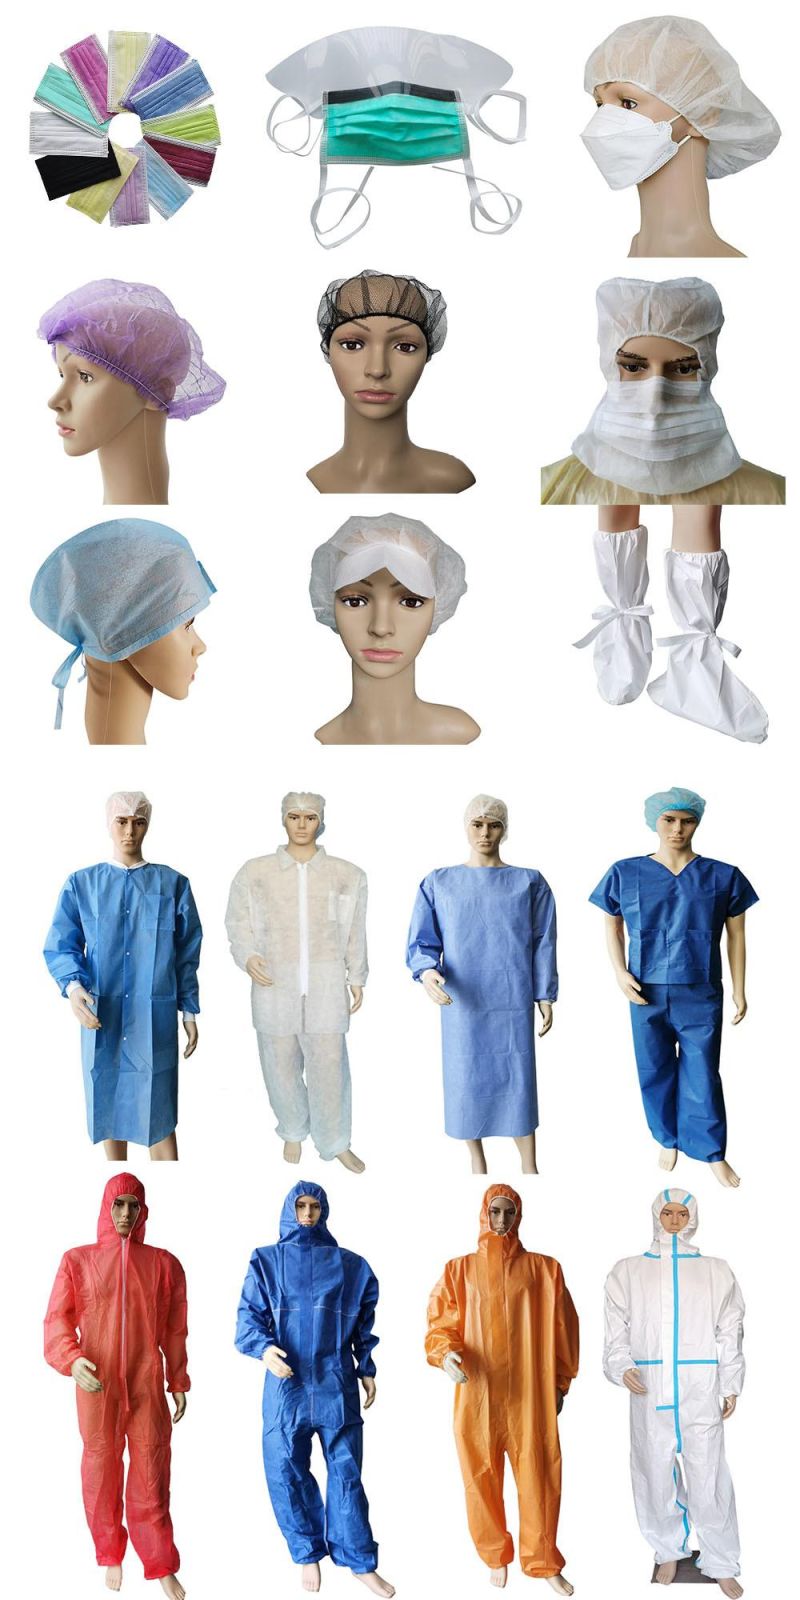 ISO13485 Certified Hygienic Protection Blue Safety Surgical Disposable Hospital Surgical SBPP Polypropylene Factory Surgeon Non-Woven Cap